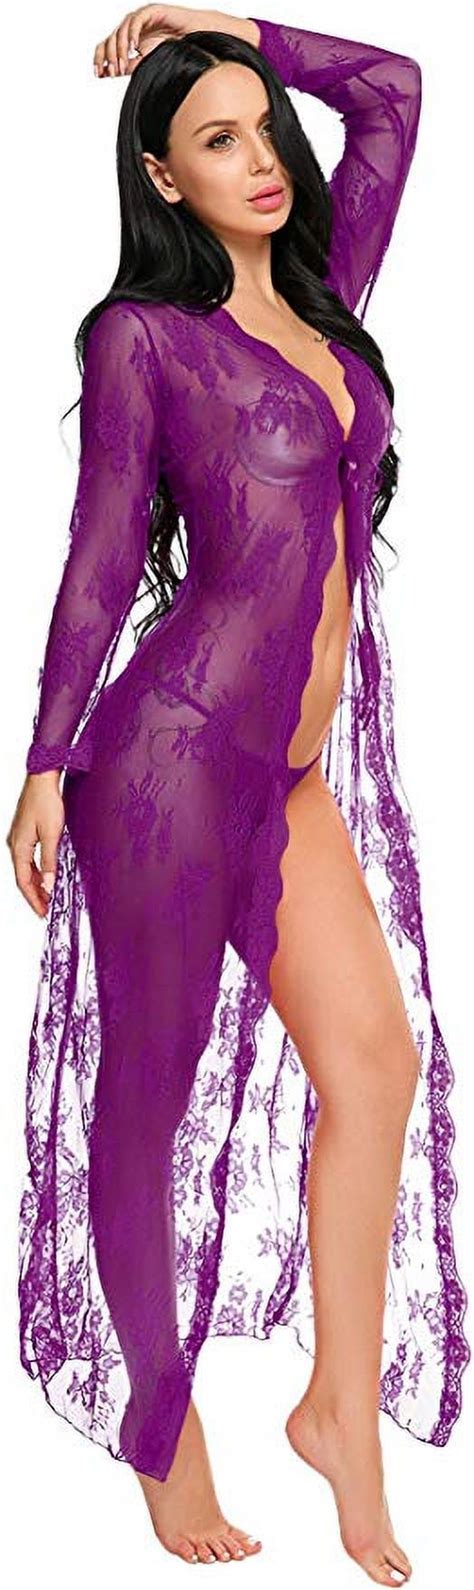 Lingerie For Women Sexy Long Lace Dress Sheer Gown See Through Kimono Robe